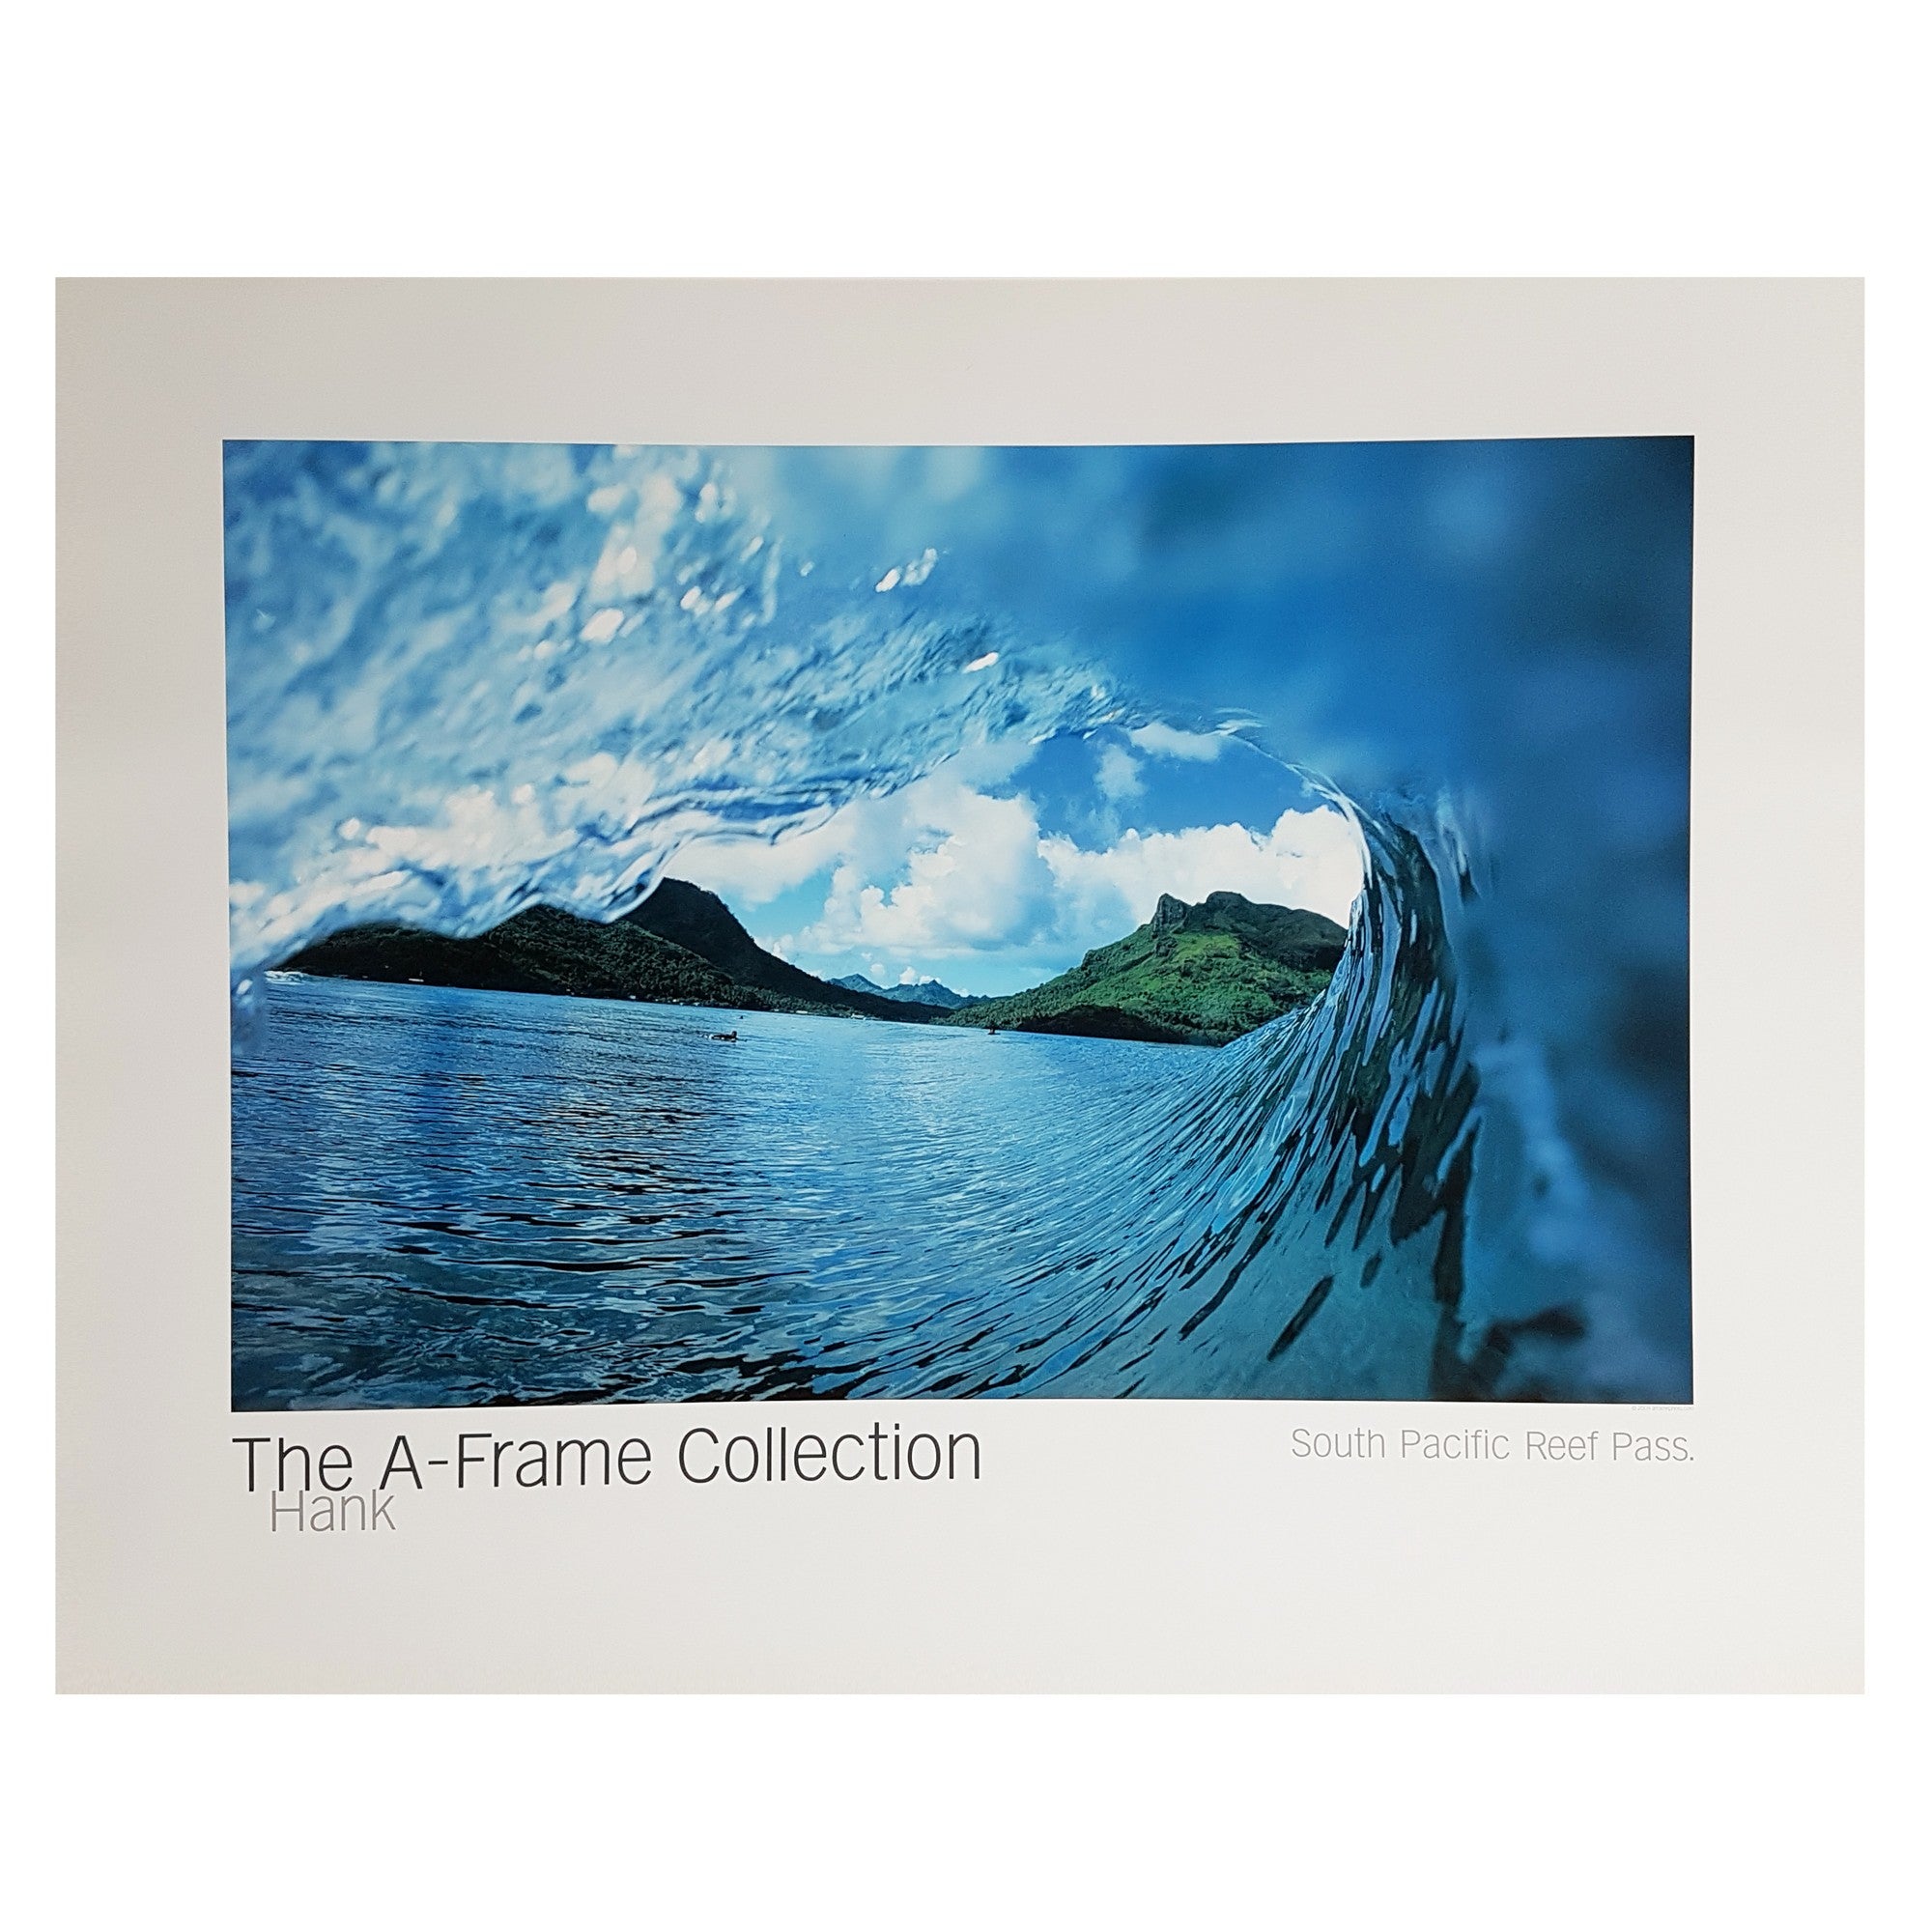 Surf Photo Poster A-FRAME COLLECTION Hank "South Pacific Reef Pass"